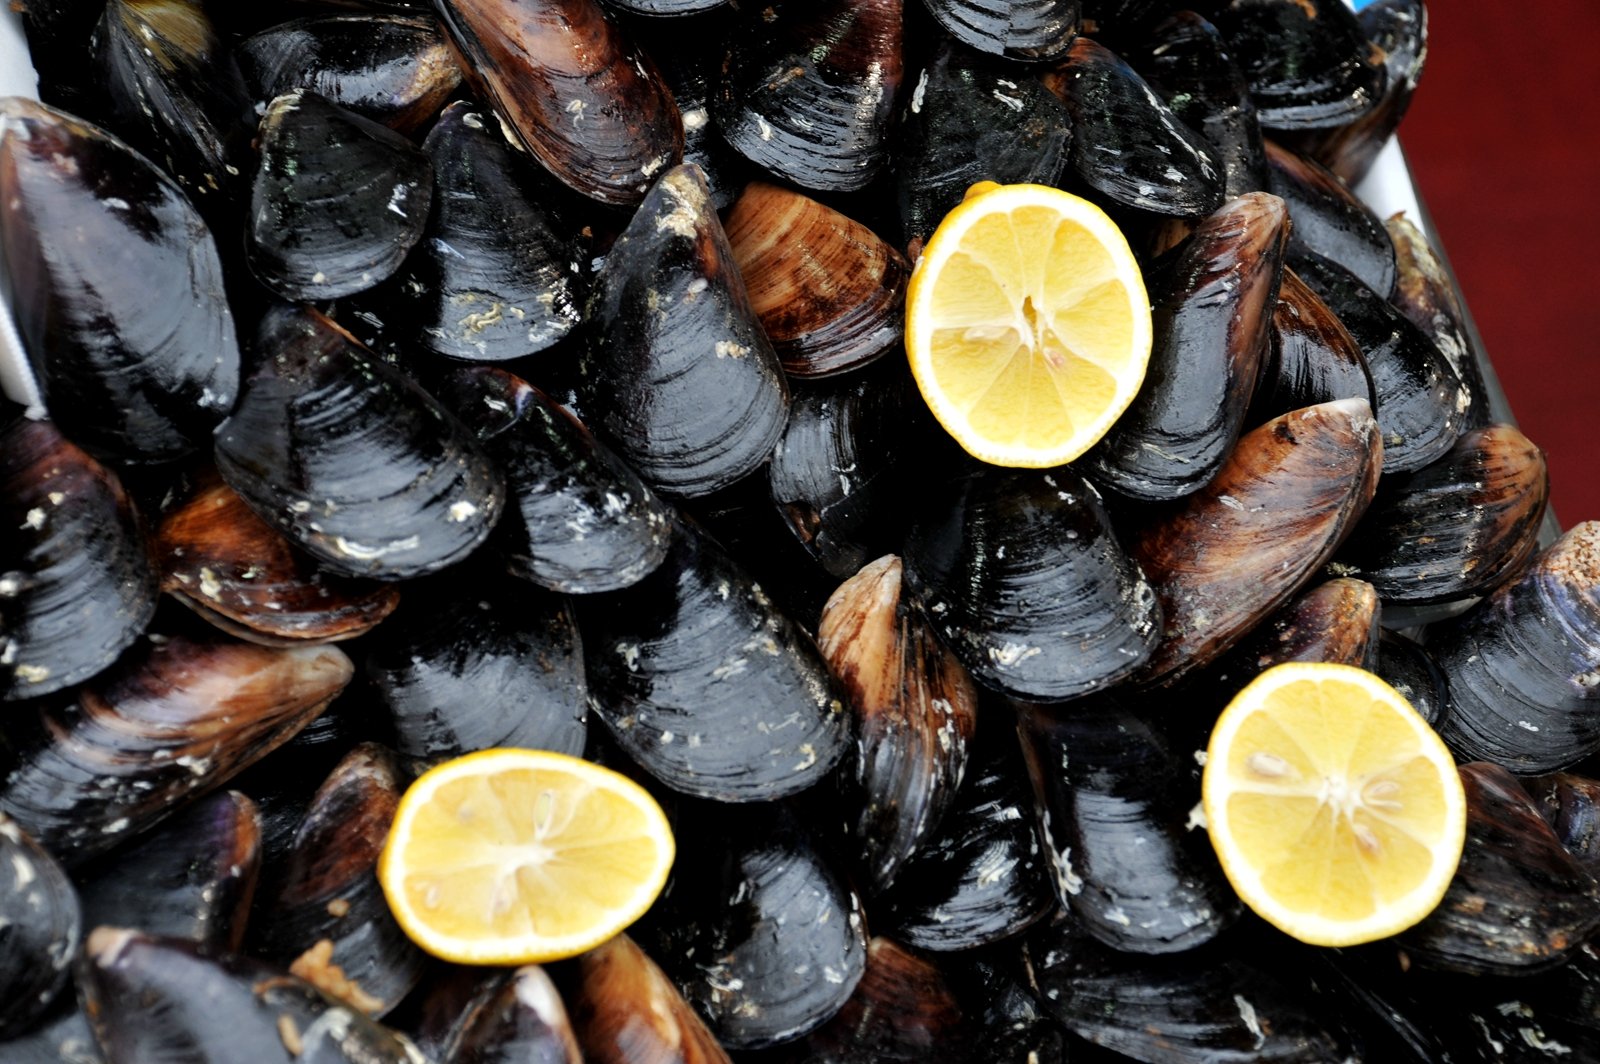 How to try stuffed mussels in Antalya